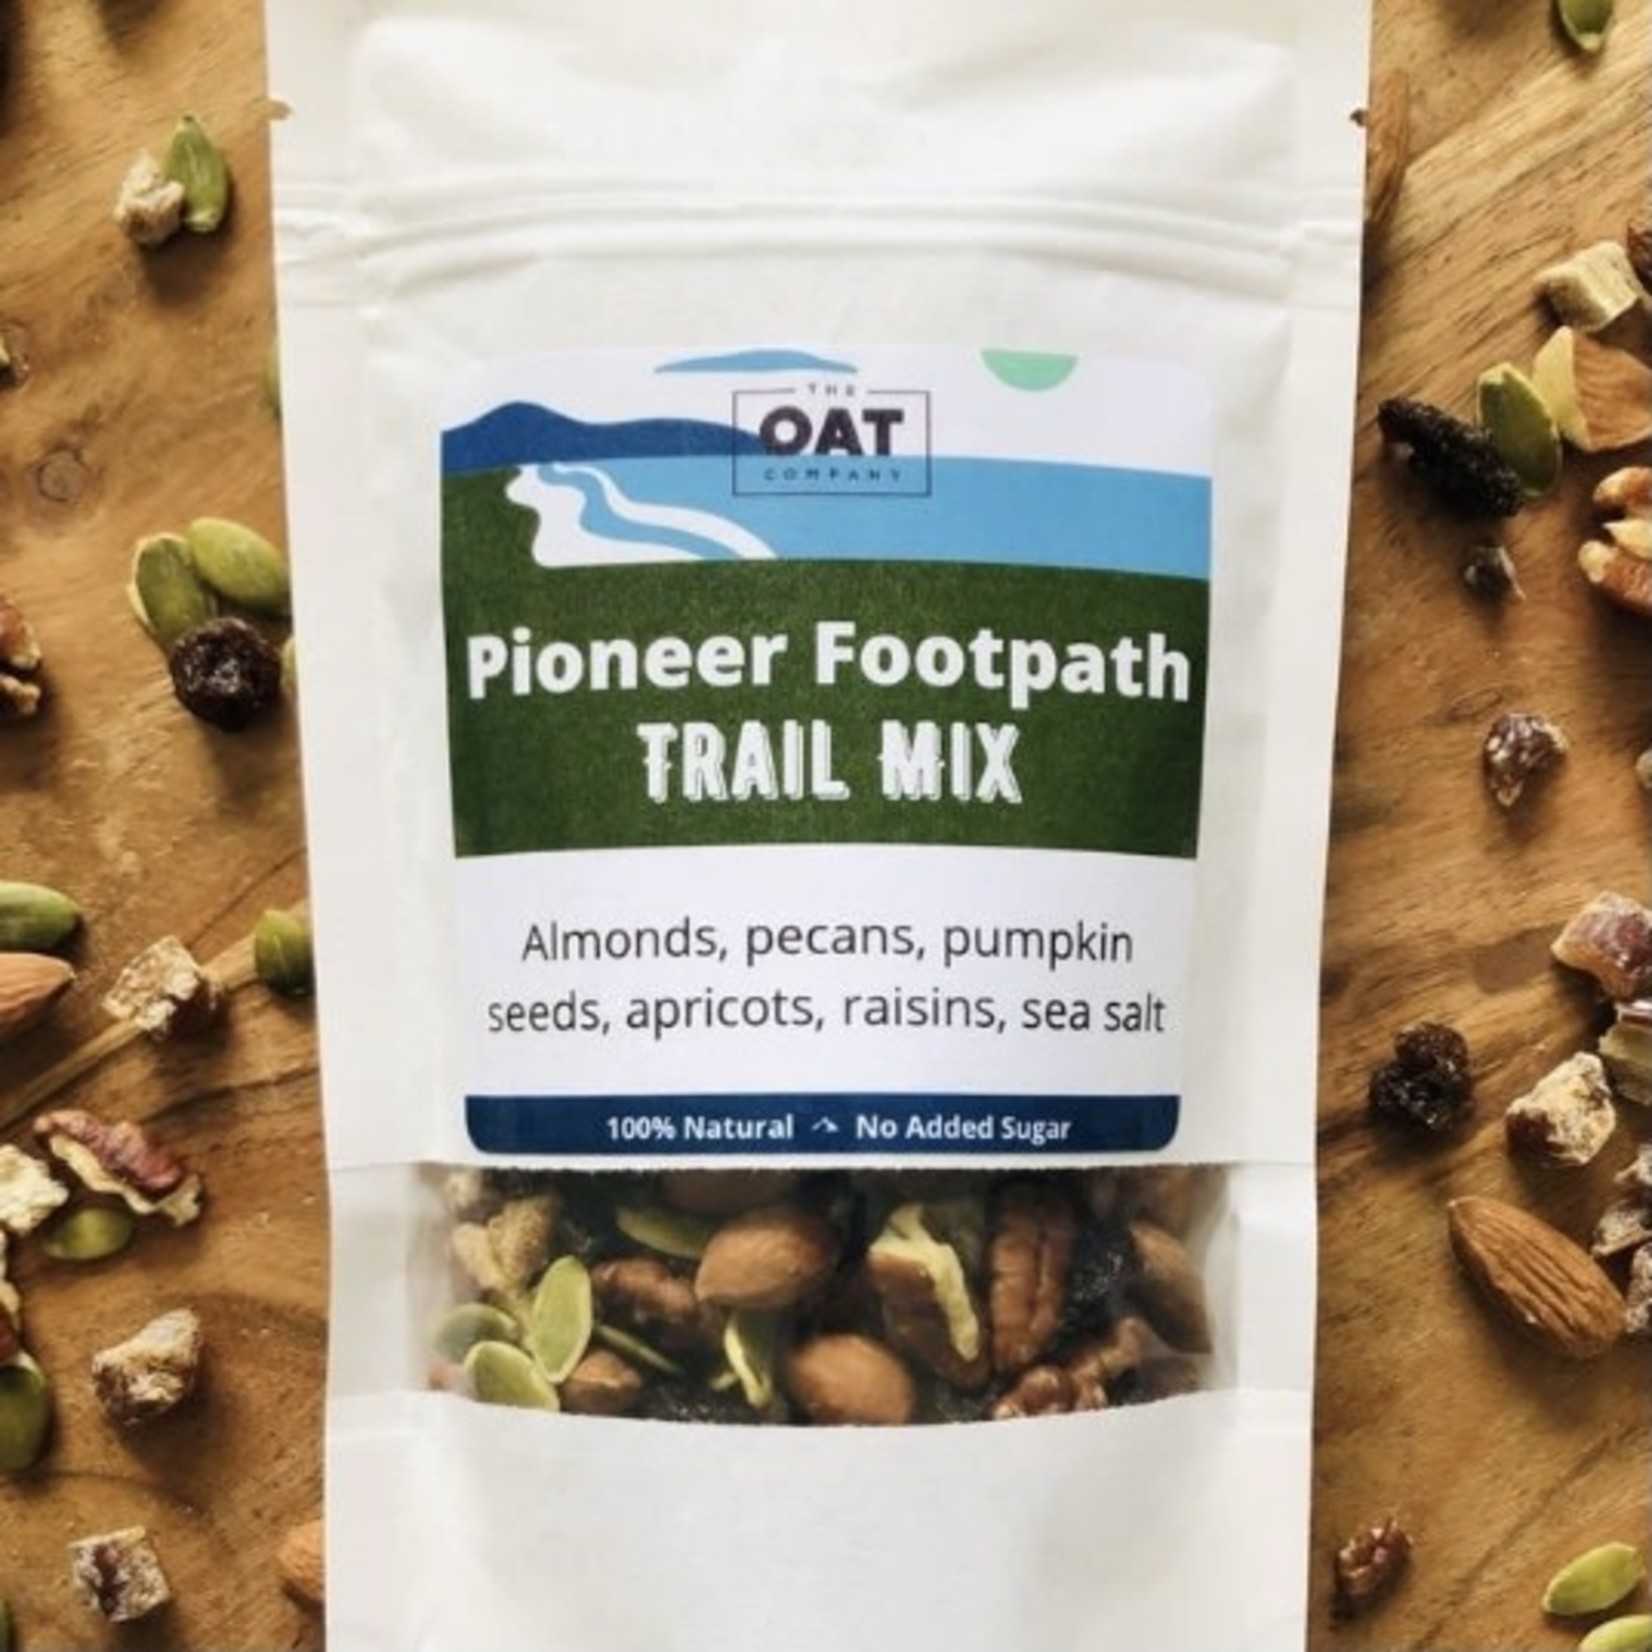 The Oat Company The Oat Company Pioneer Footpath Trail Mix